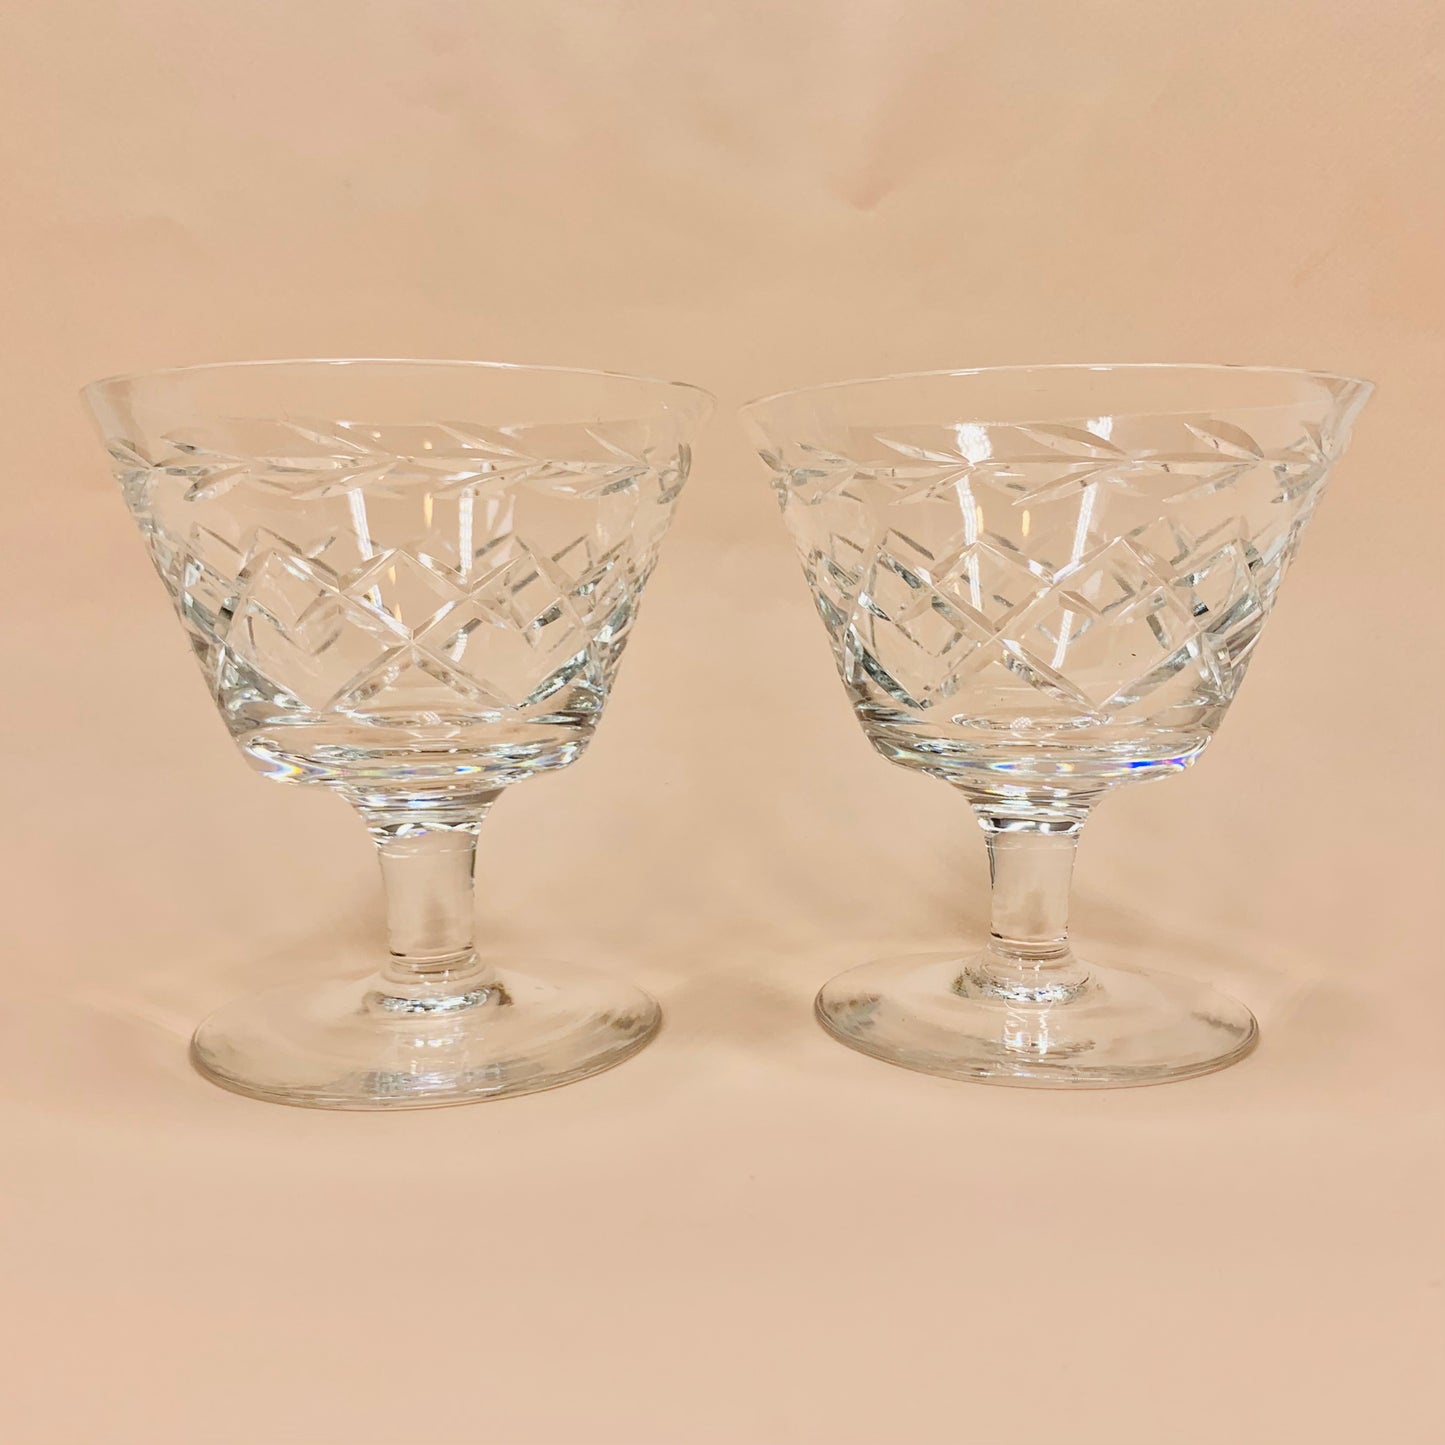 Antique English Webb cut crystal coupe/cocktail glasses